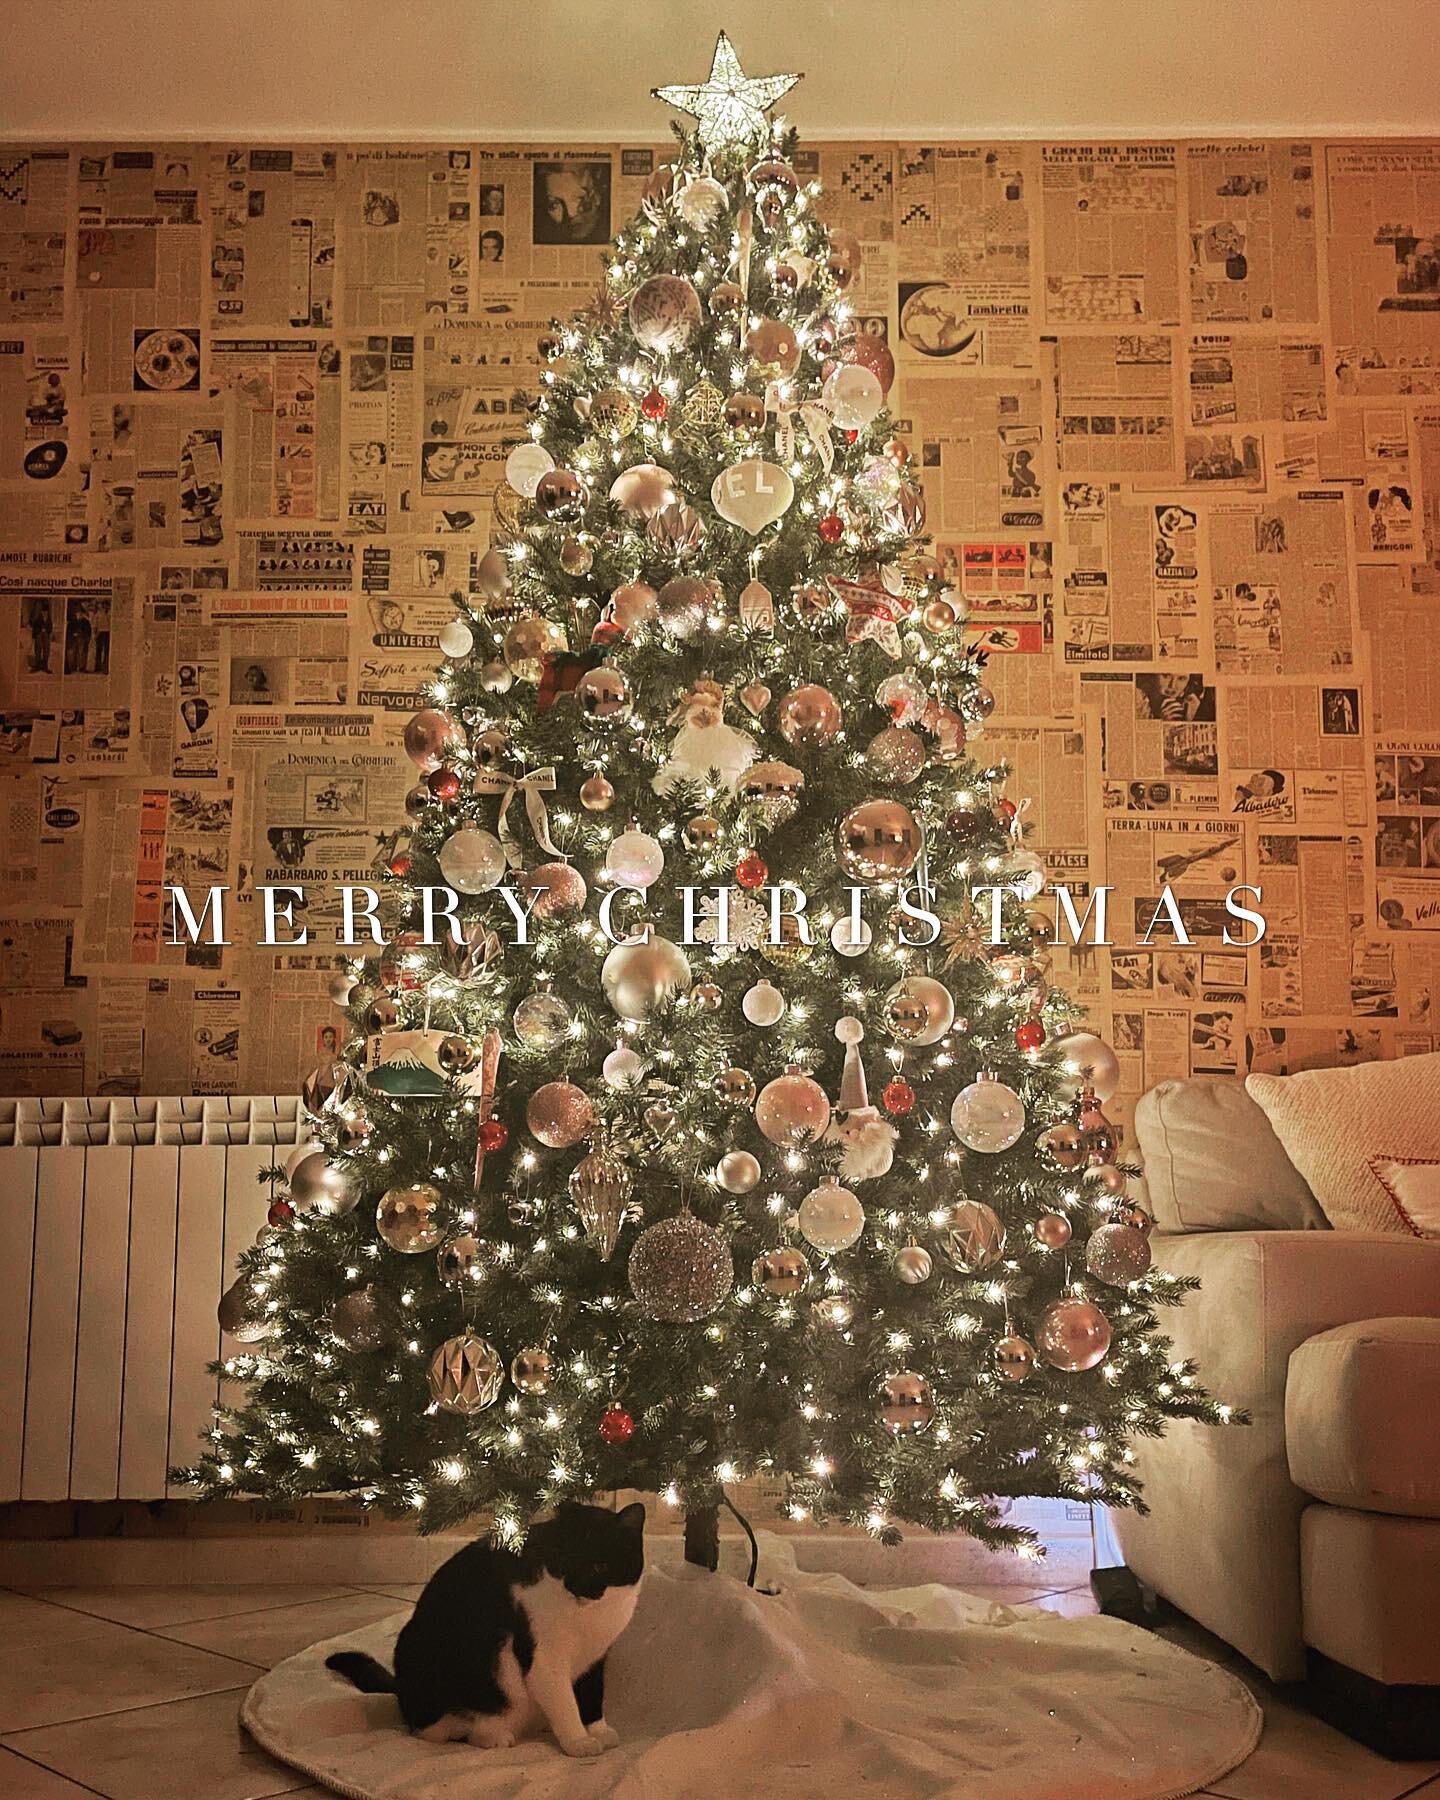 Wishing you a Merry Christmas &amp; happy, healthy holiday to you and your love ones😘
.
A little update, the new addition to our family is right there under the tree 😆
.
.
.
#merrychristmas #merrychristmas2022 #thisisus #familyof3 #lifeinsicily #si